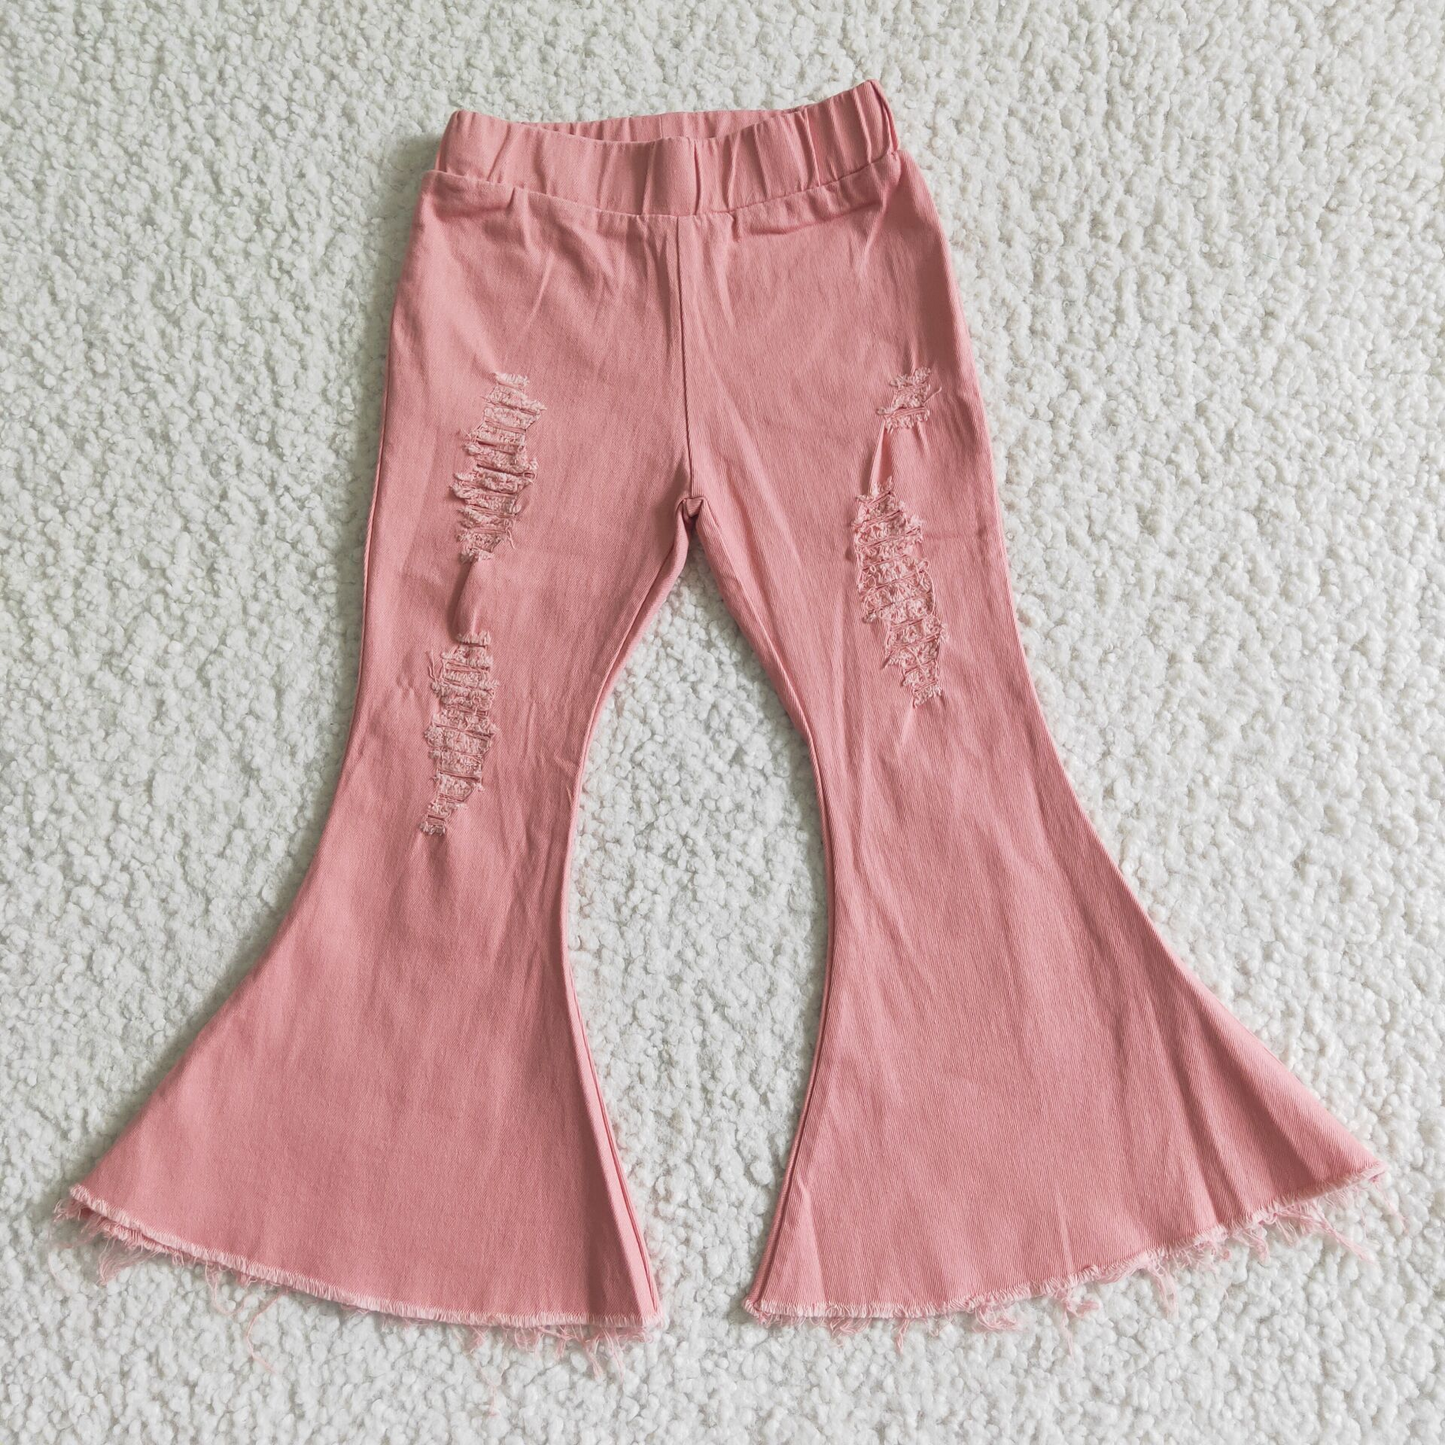 Bell bottom pink jeans      C13-1-2